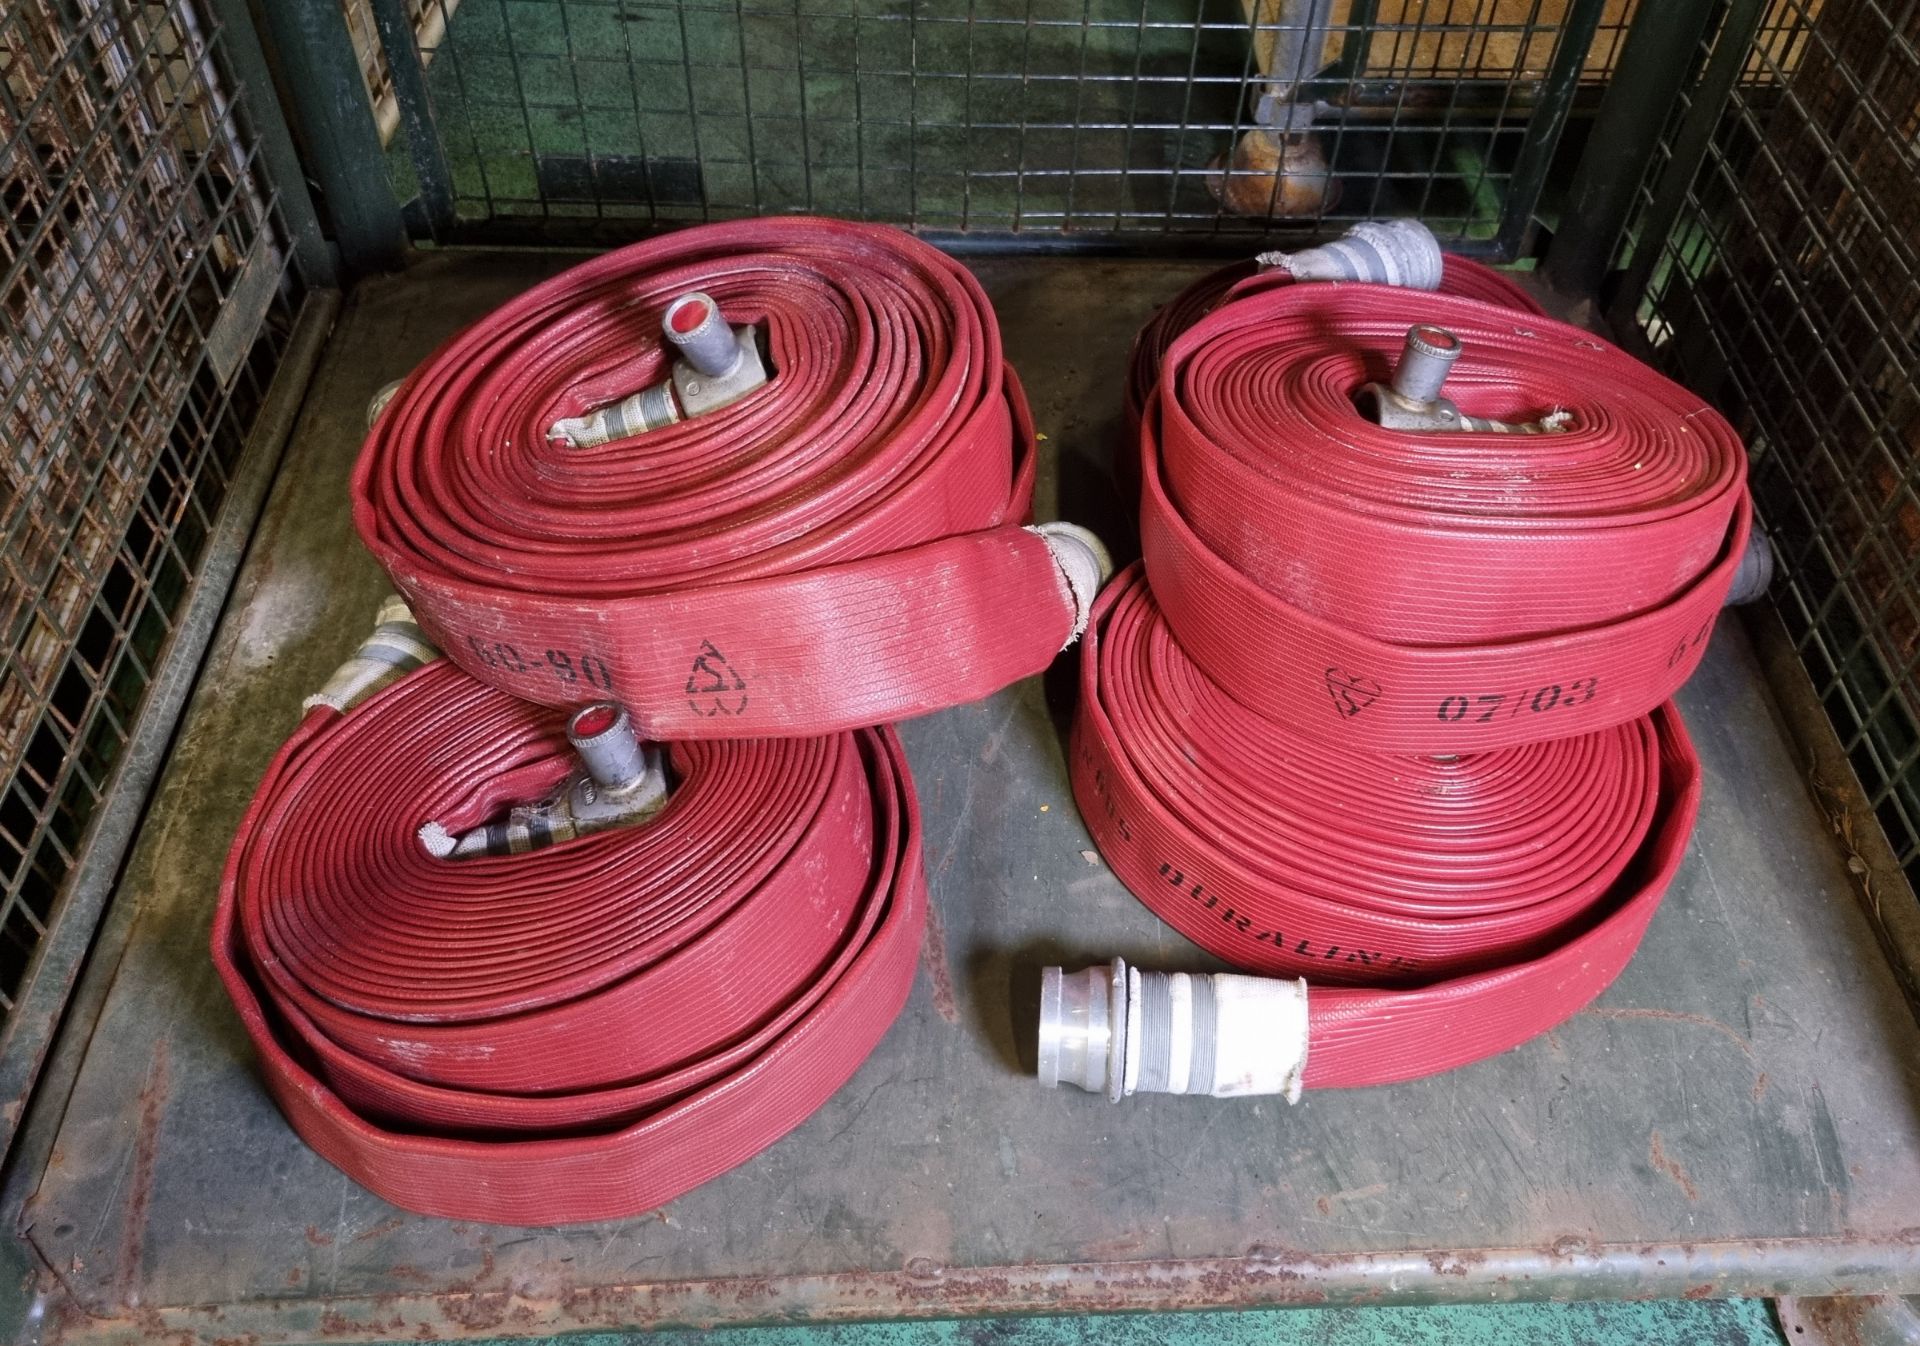 6x Angus Duraline 64mm lay flat hoses with couplings - approx 15m in length - Bild 2 aus 4